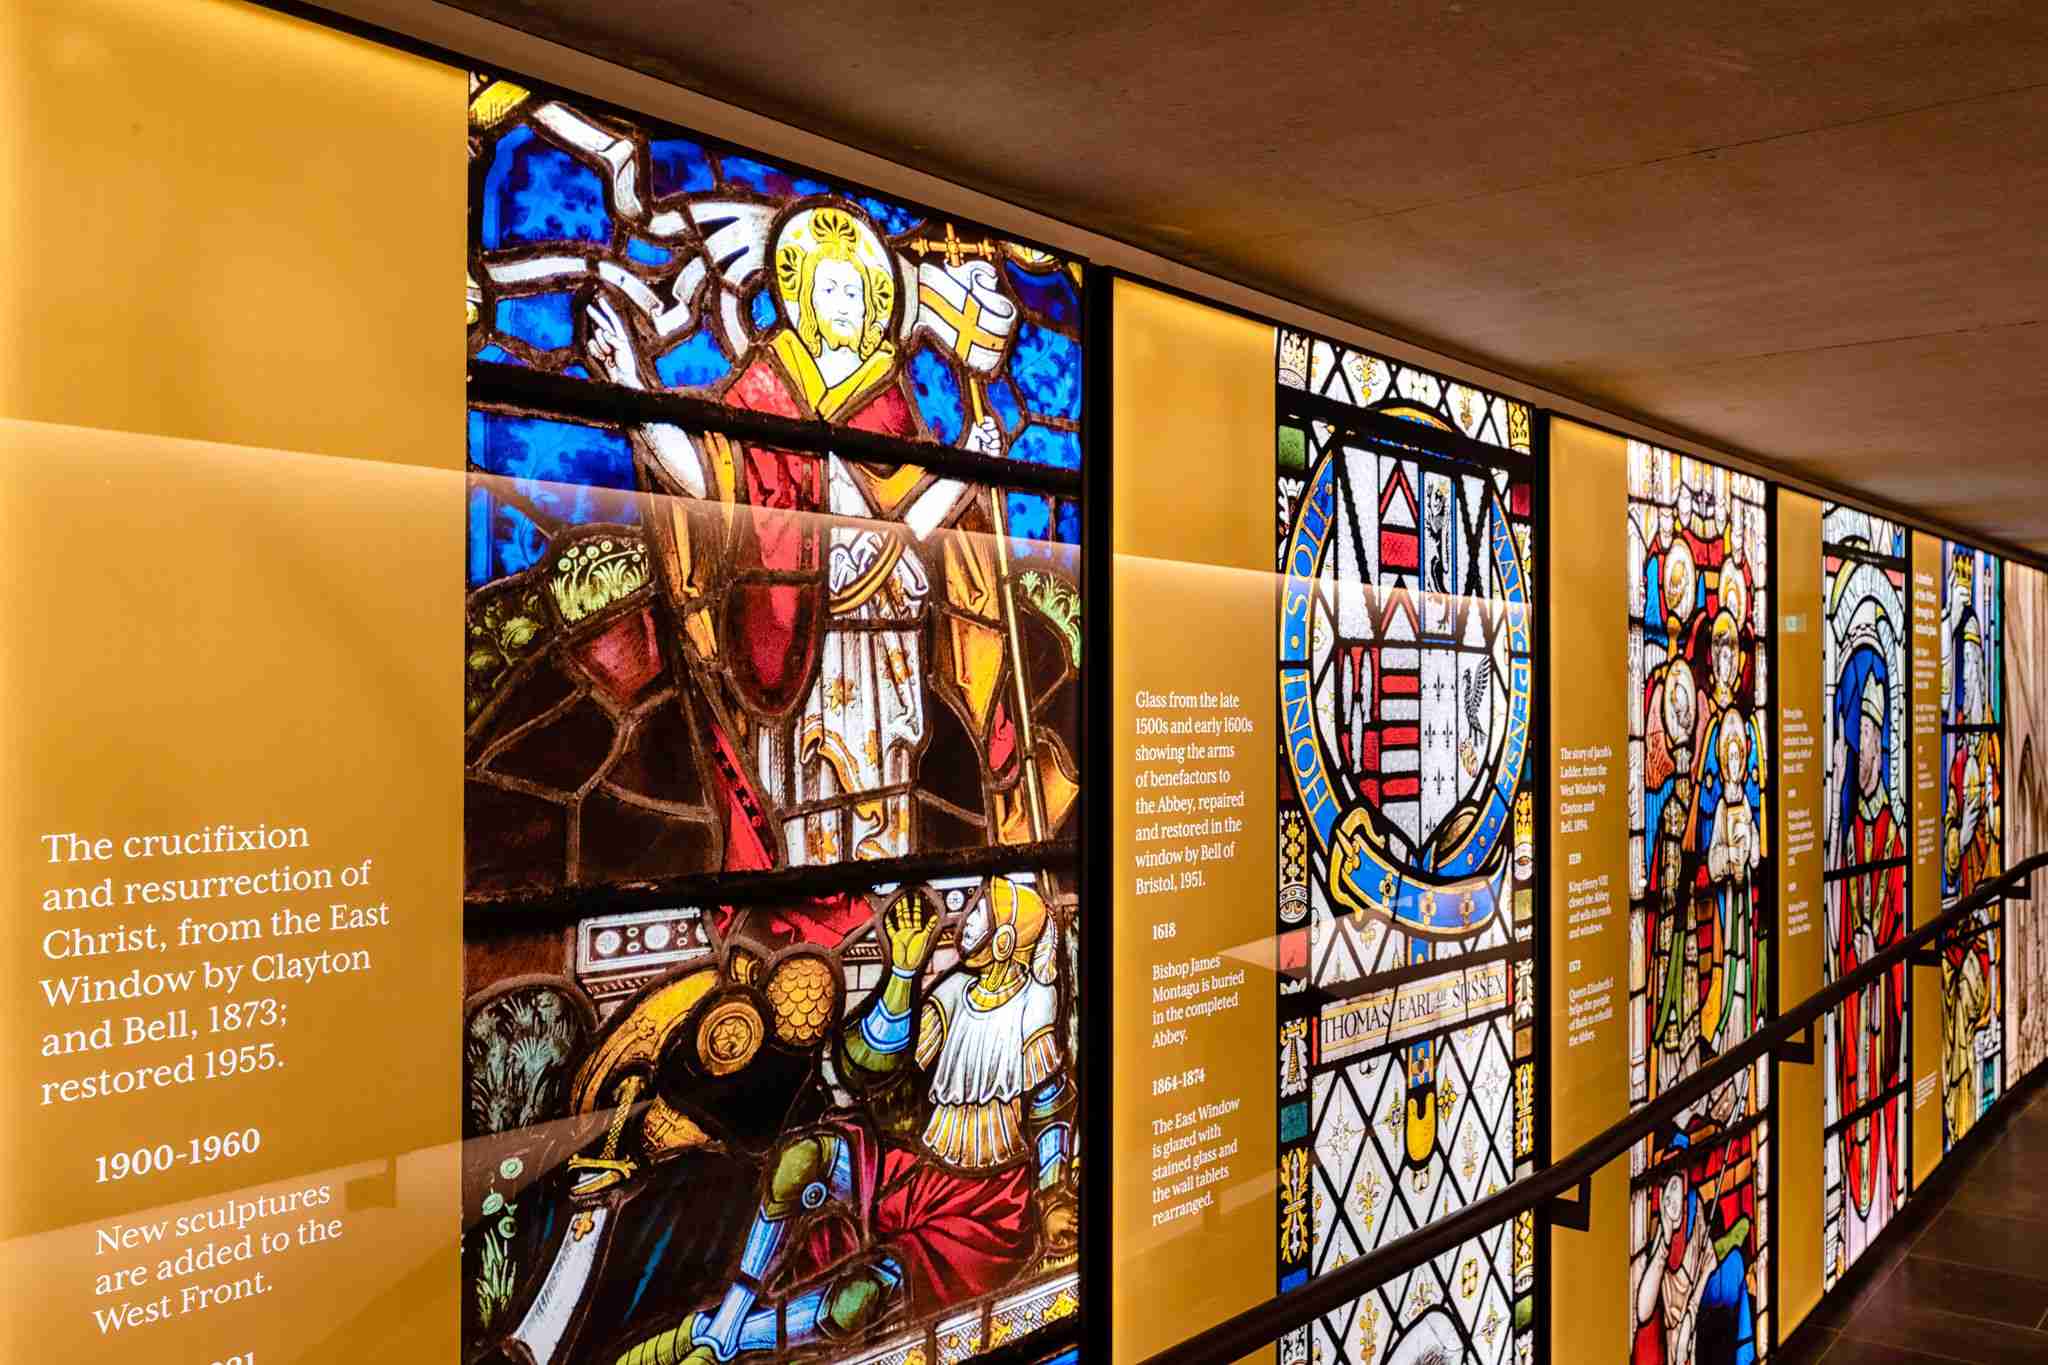 Images of stained glass from Bath Abbey's windows